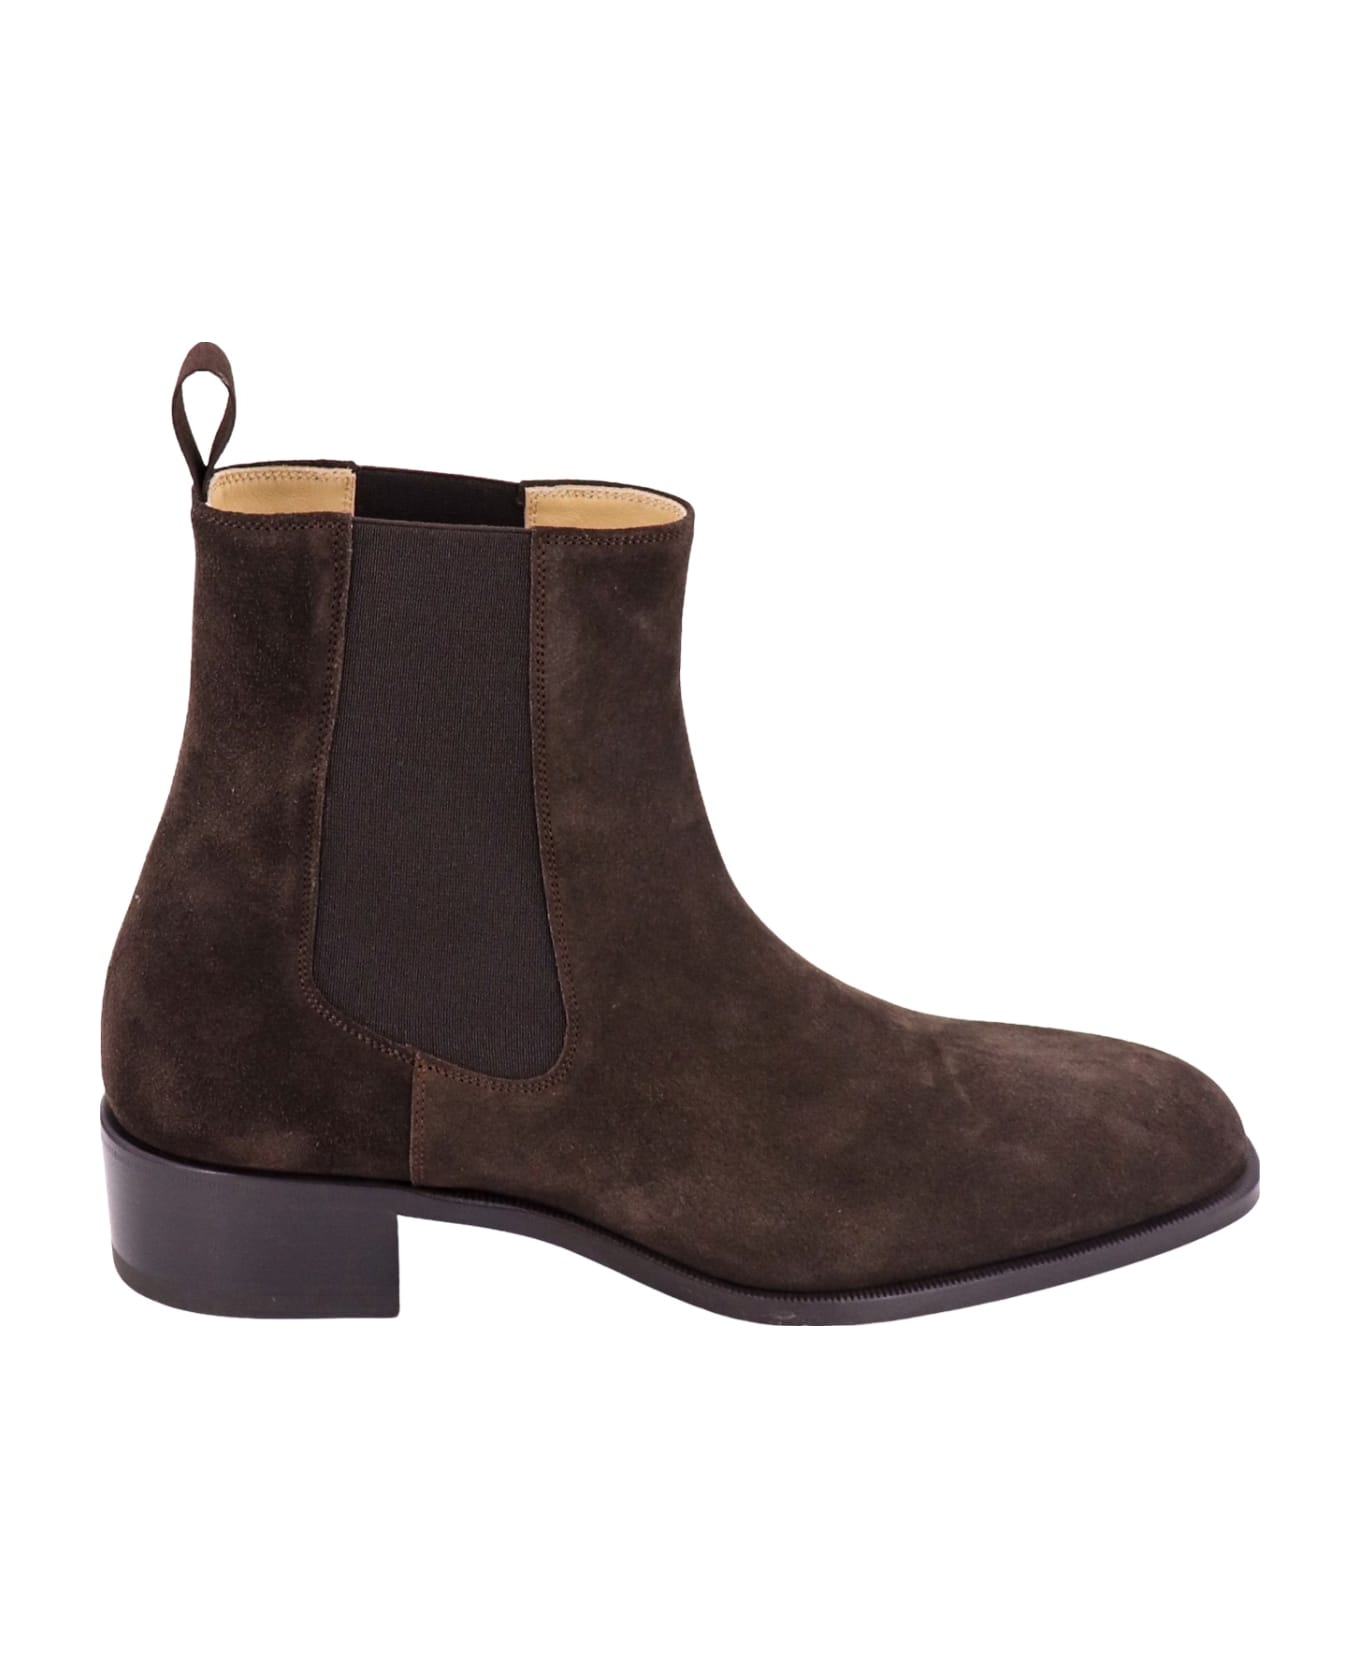 Tom Ford Boots - Brown ブーツ